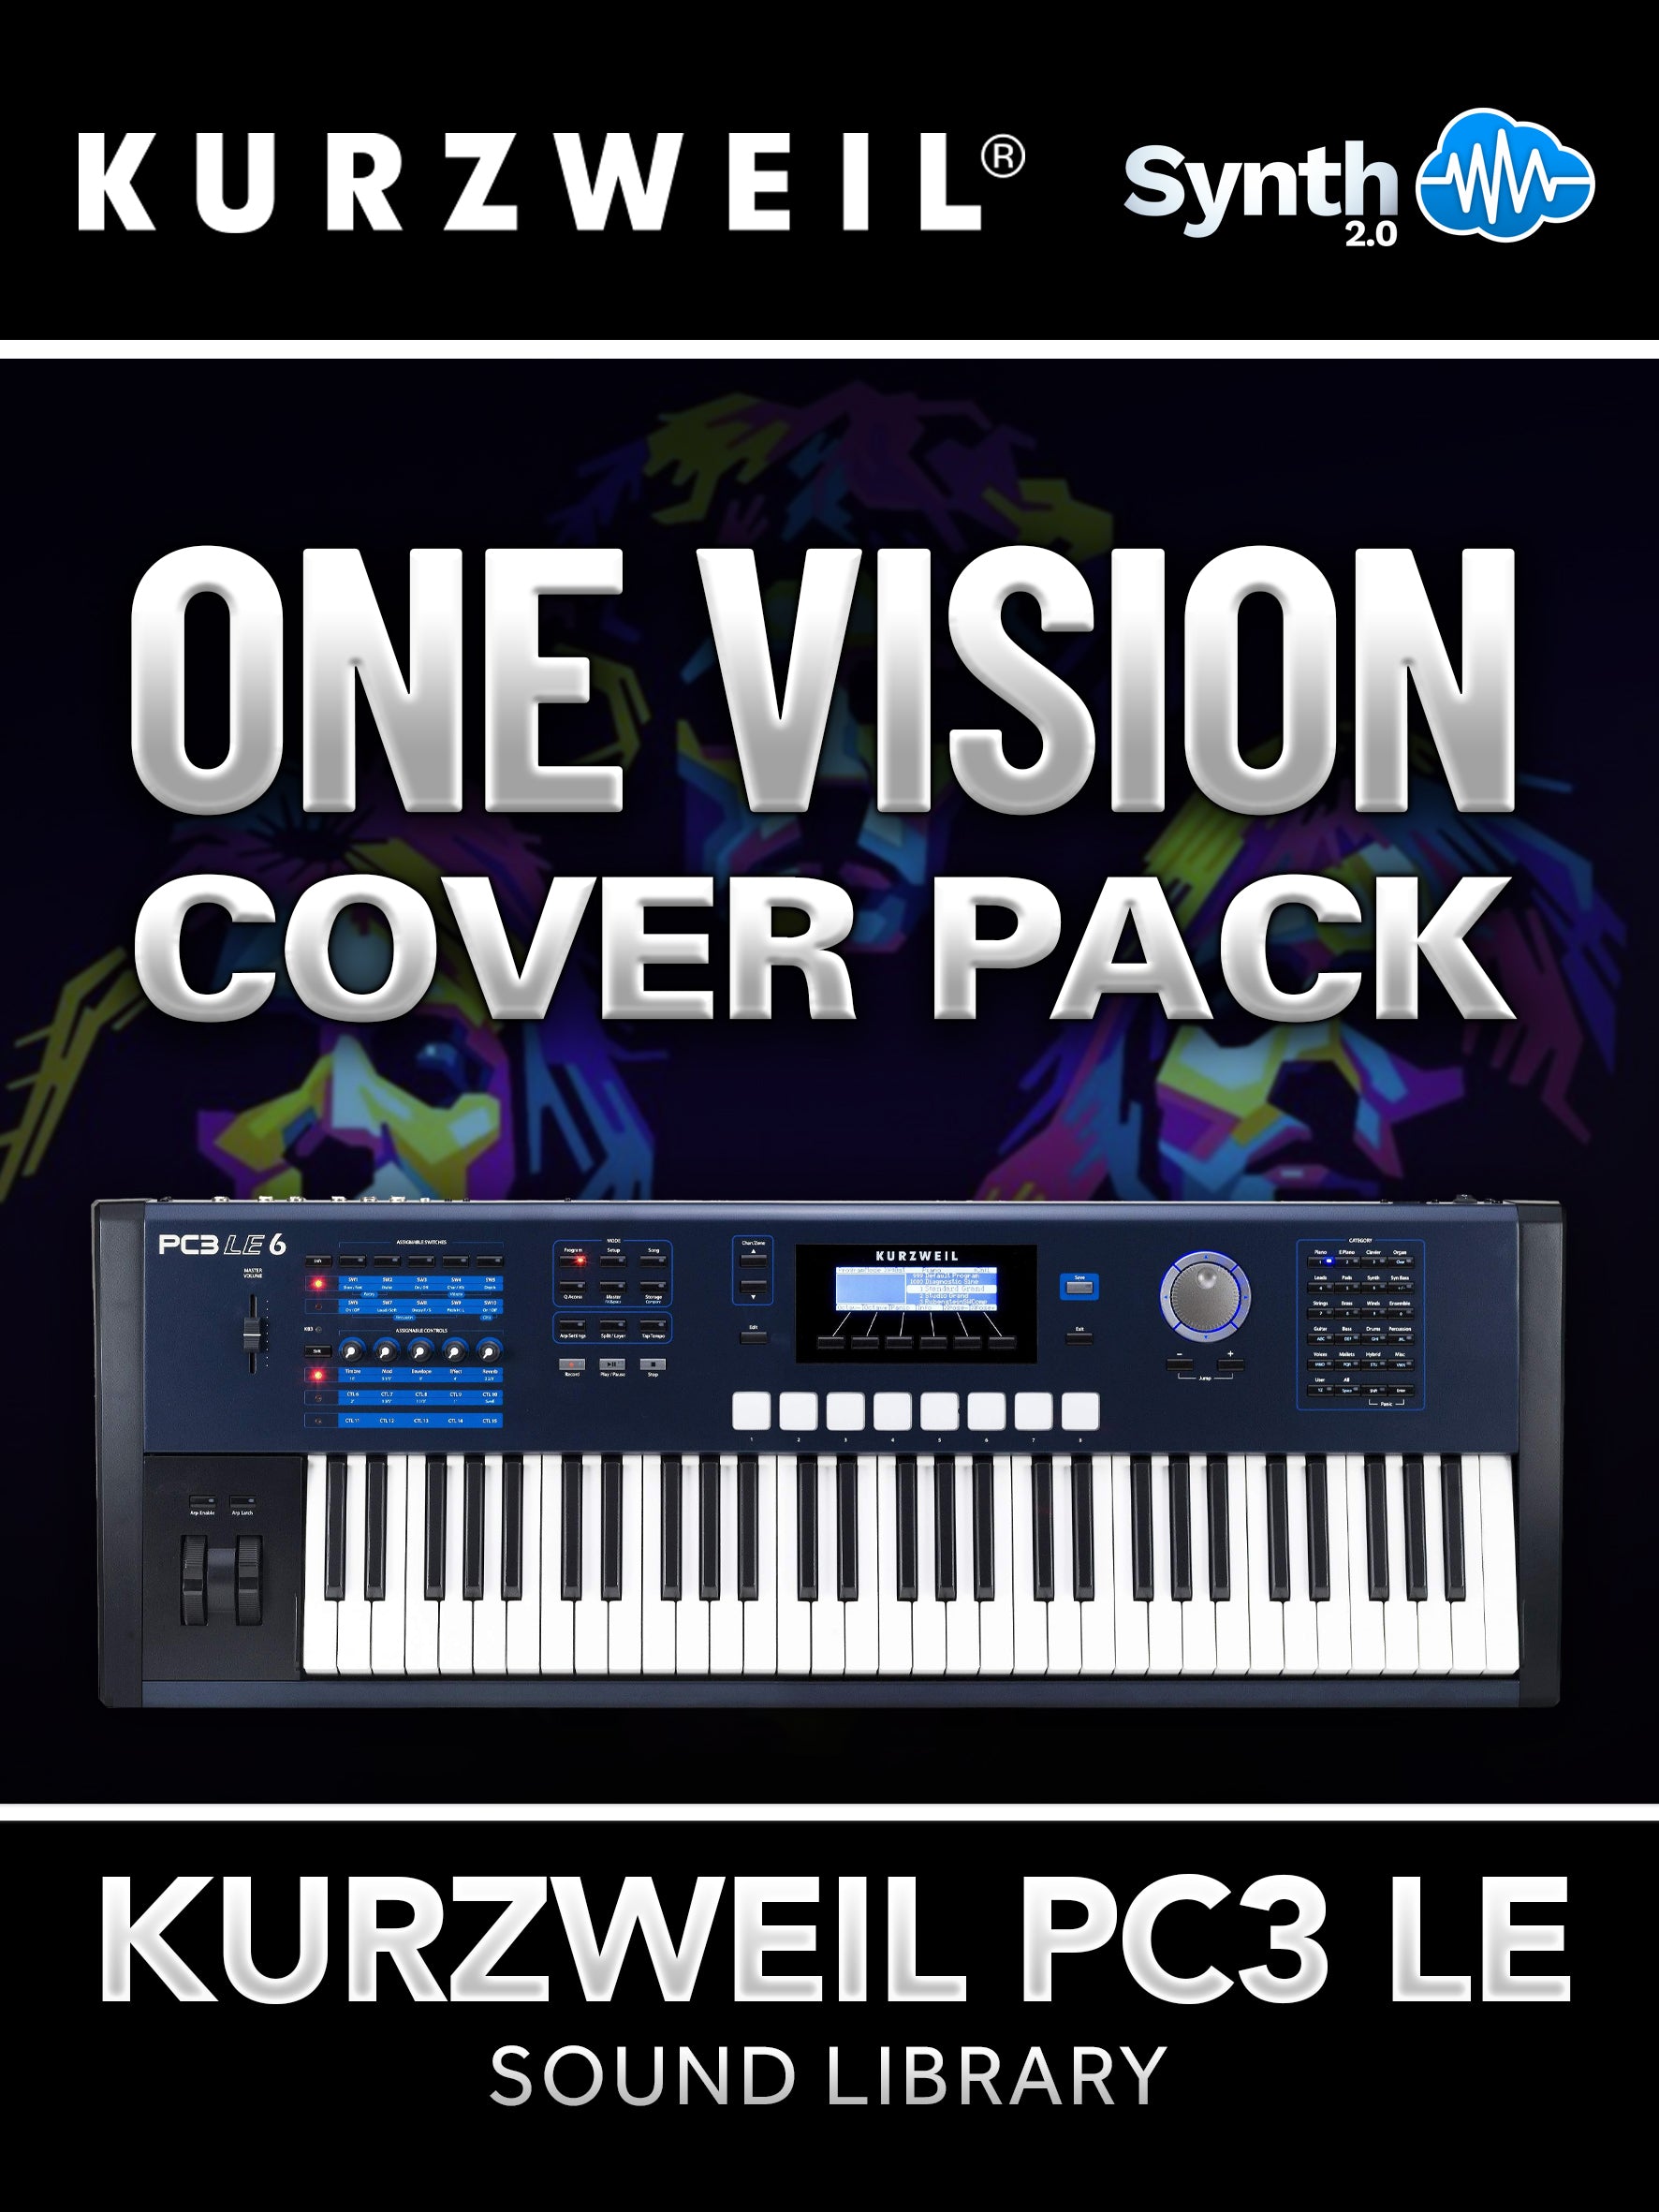 LDX138 - ( Bundle ) - One Vision Cover Pack + T9T9 Cover Pack - Kurzweil PC3LE